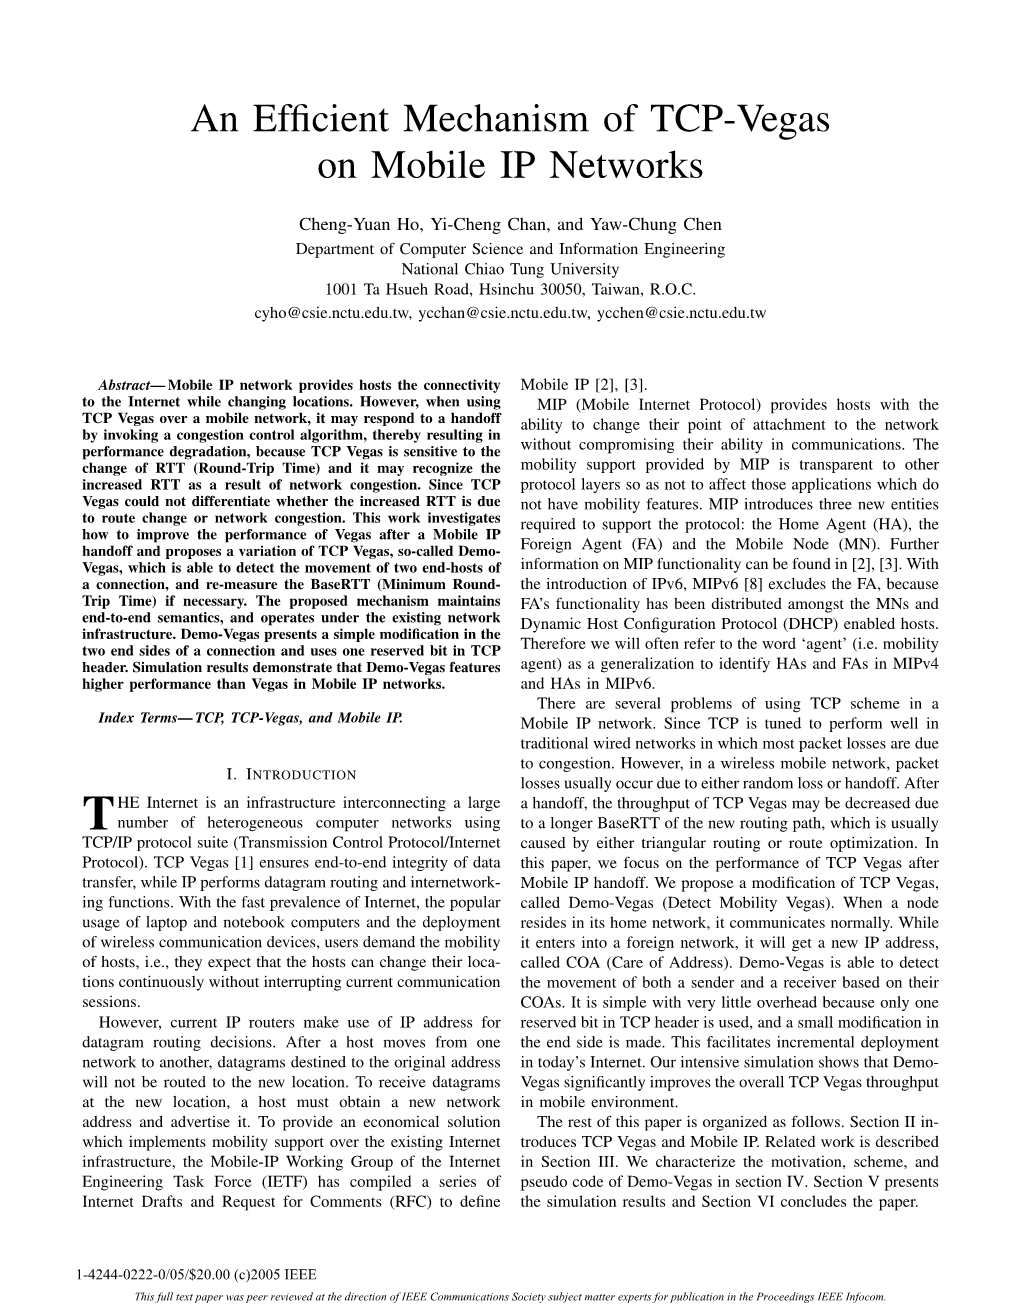 An Efficient Mechanism of TCP-Vegas on Mobile IP Networks